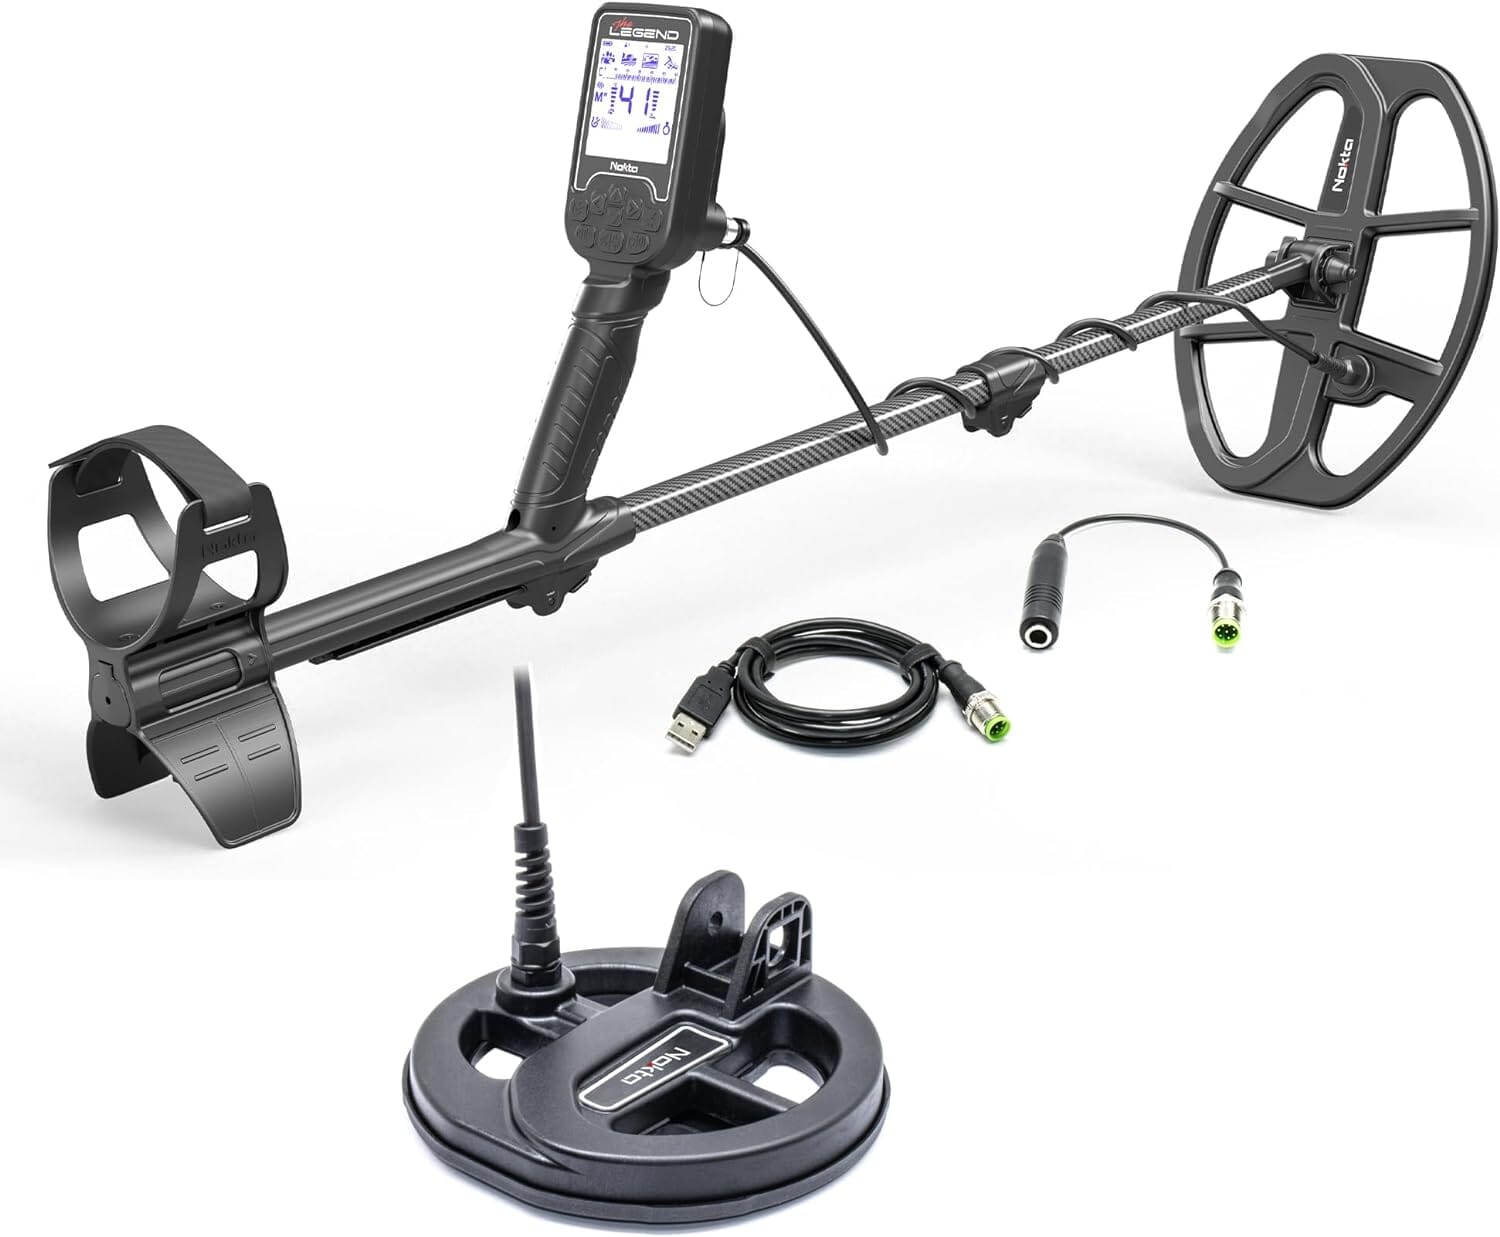 Nokta Legend, Waterproof Metal Detector with 12" x 9" LG30 Coil and 6" LG15 Coil